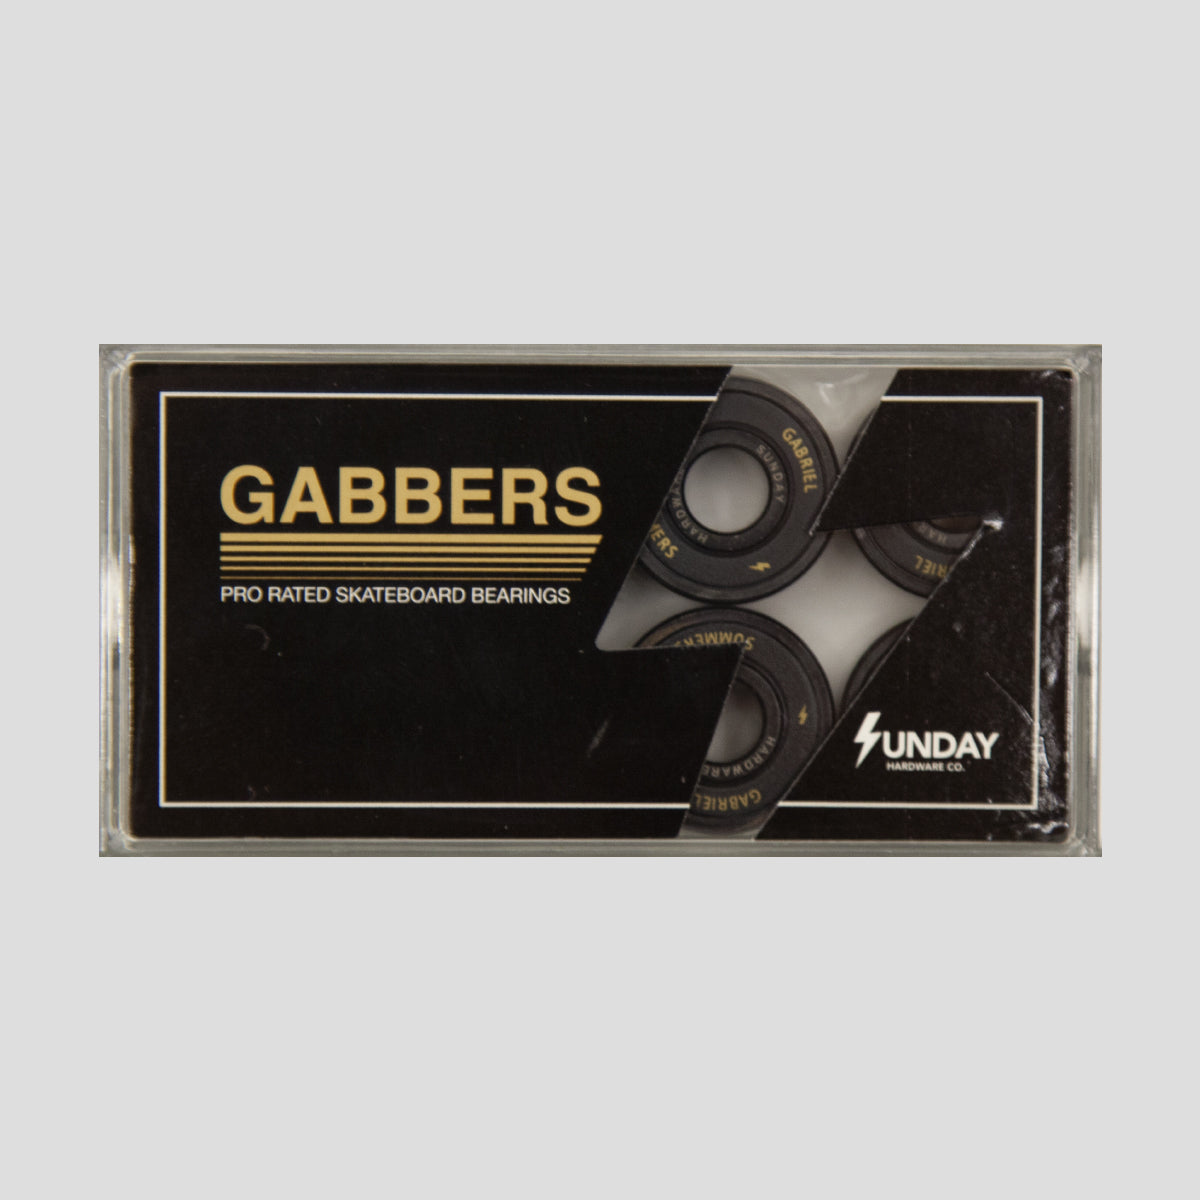 SUNDAY HARDWARE GABRIEL SUMMERS PRO RATED BEARINGS